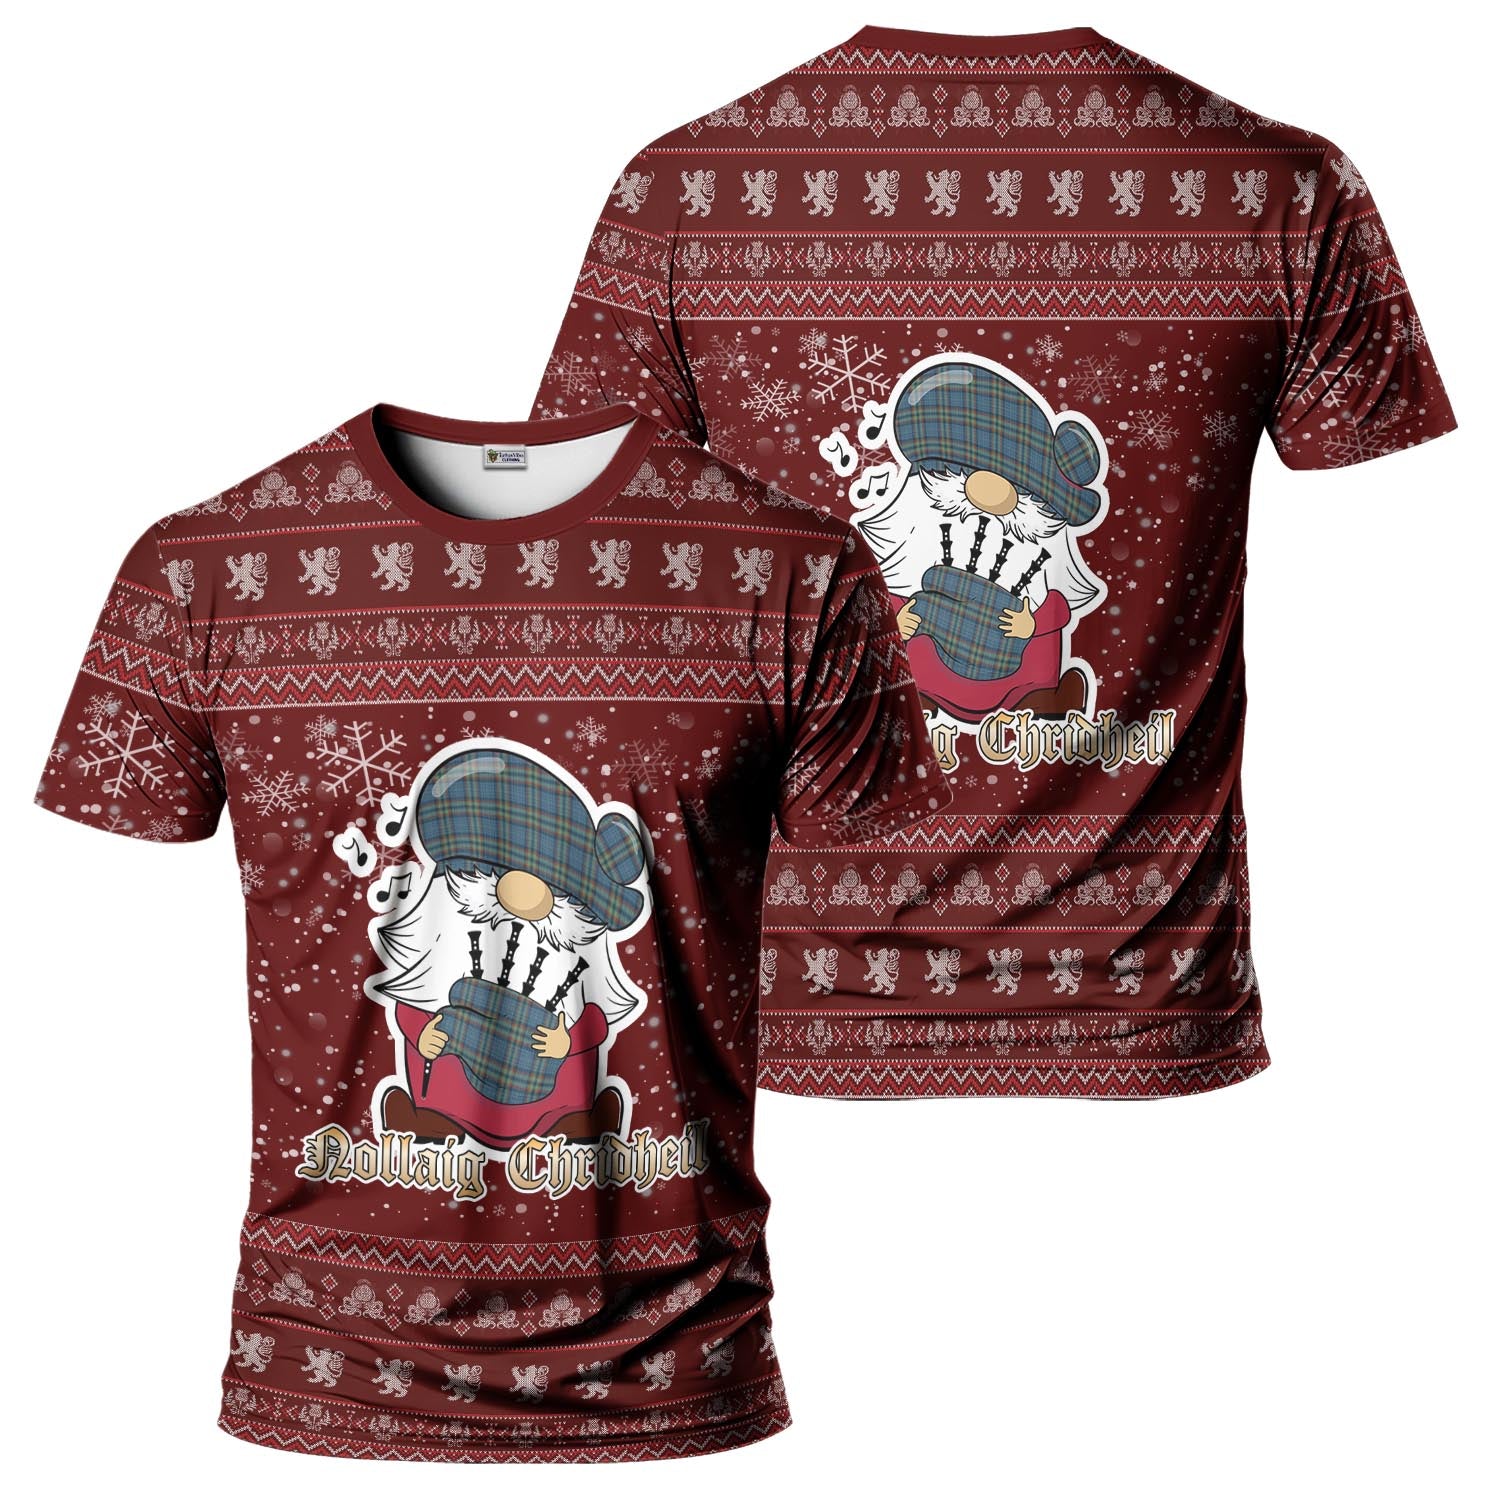 Ralston UK Clan Christmas Family T-Shirt with Funny Gnome Playing Bagpipes - Tartanvibesclothing